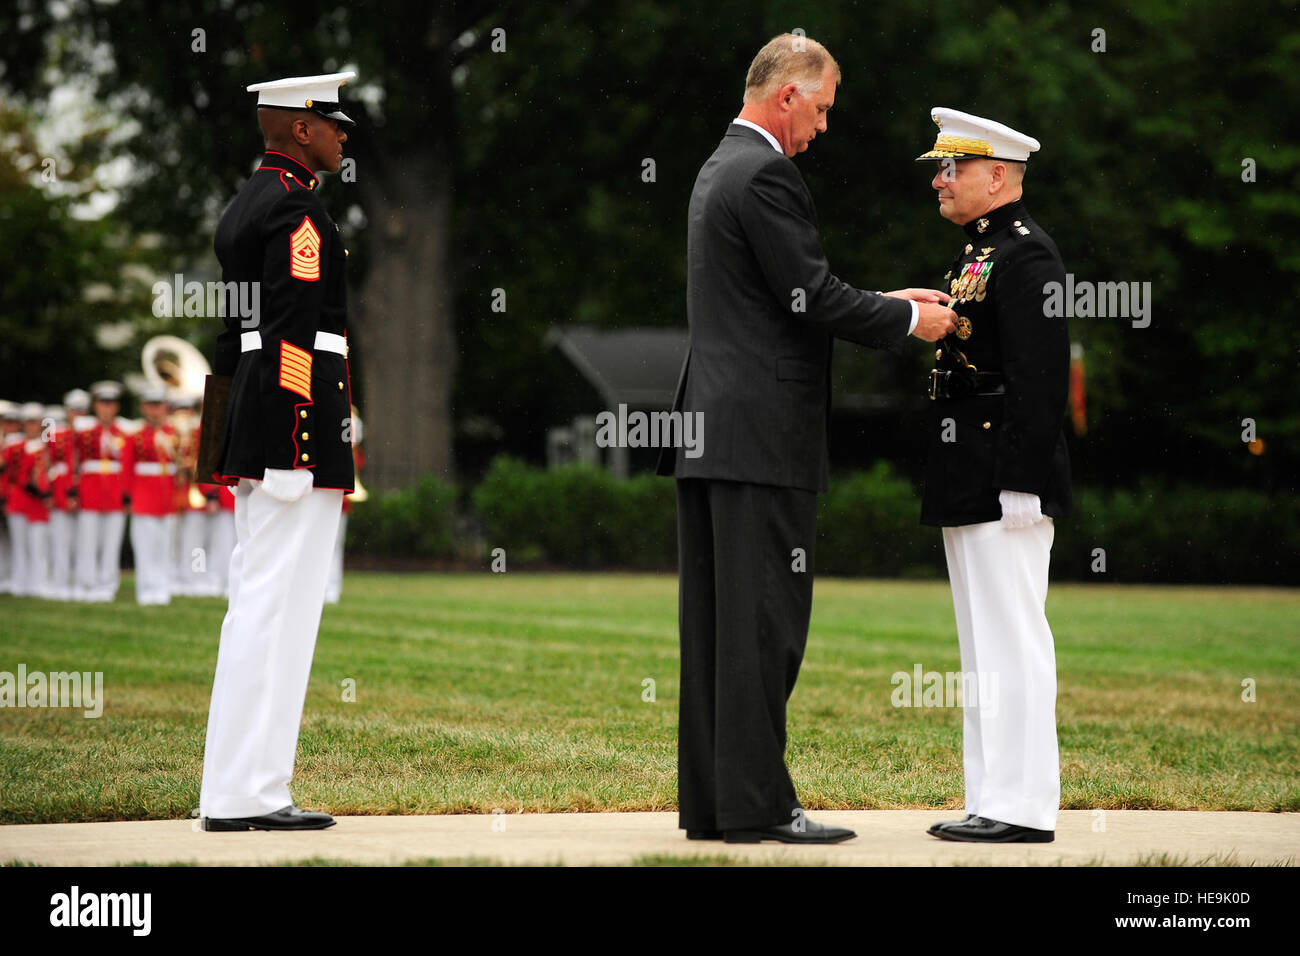 Deputy Secretary of Defense William J. Lynn awards Joint Chiefs of Staff Vice Chairman Gen. James E. Cartwright the Defense Distinguished Service Medal at the Marine Corps Barracks, Washington, D.C., Aug. 3, 2011.  Tech. Sgt. Jacob N. Bailey, U.S. Air Force Stock Photo